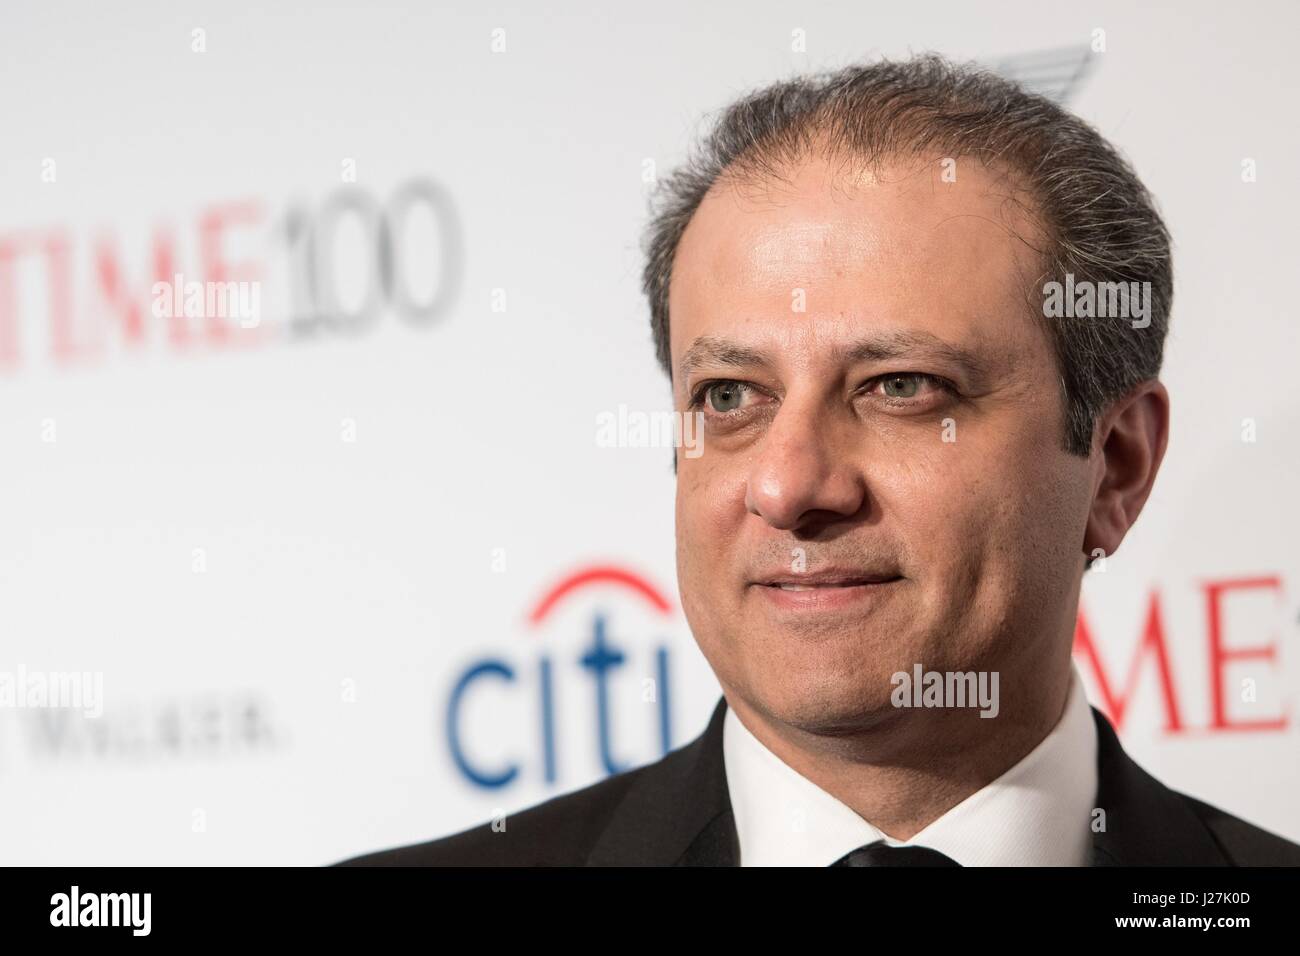 New York, NY, USA. 25th Apr, 2017. Preet Bharara at arrivals for TIME 100 Gala Dinner 2017, Jazz at Lincoln Center's Frederick P. Rose Hall, New York, NY April 25, 2017. Credit: Steven Ferdman/Everett Collection/Alamy Live News Stock Photo